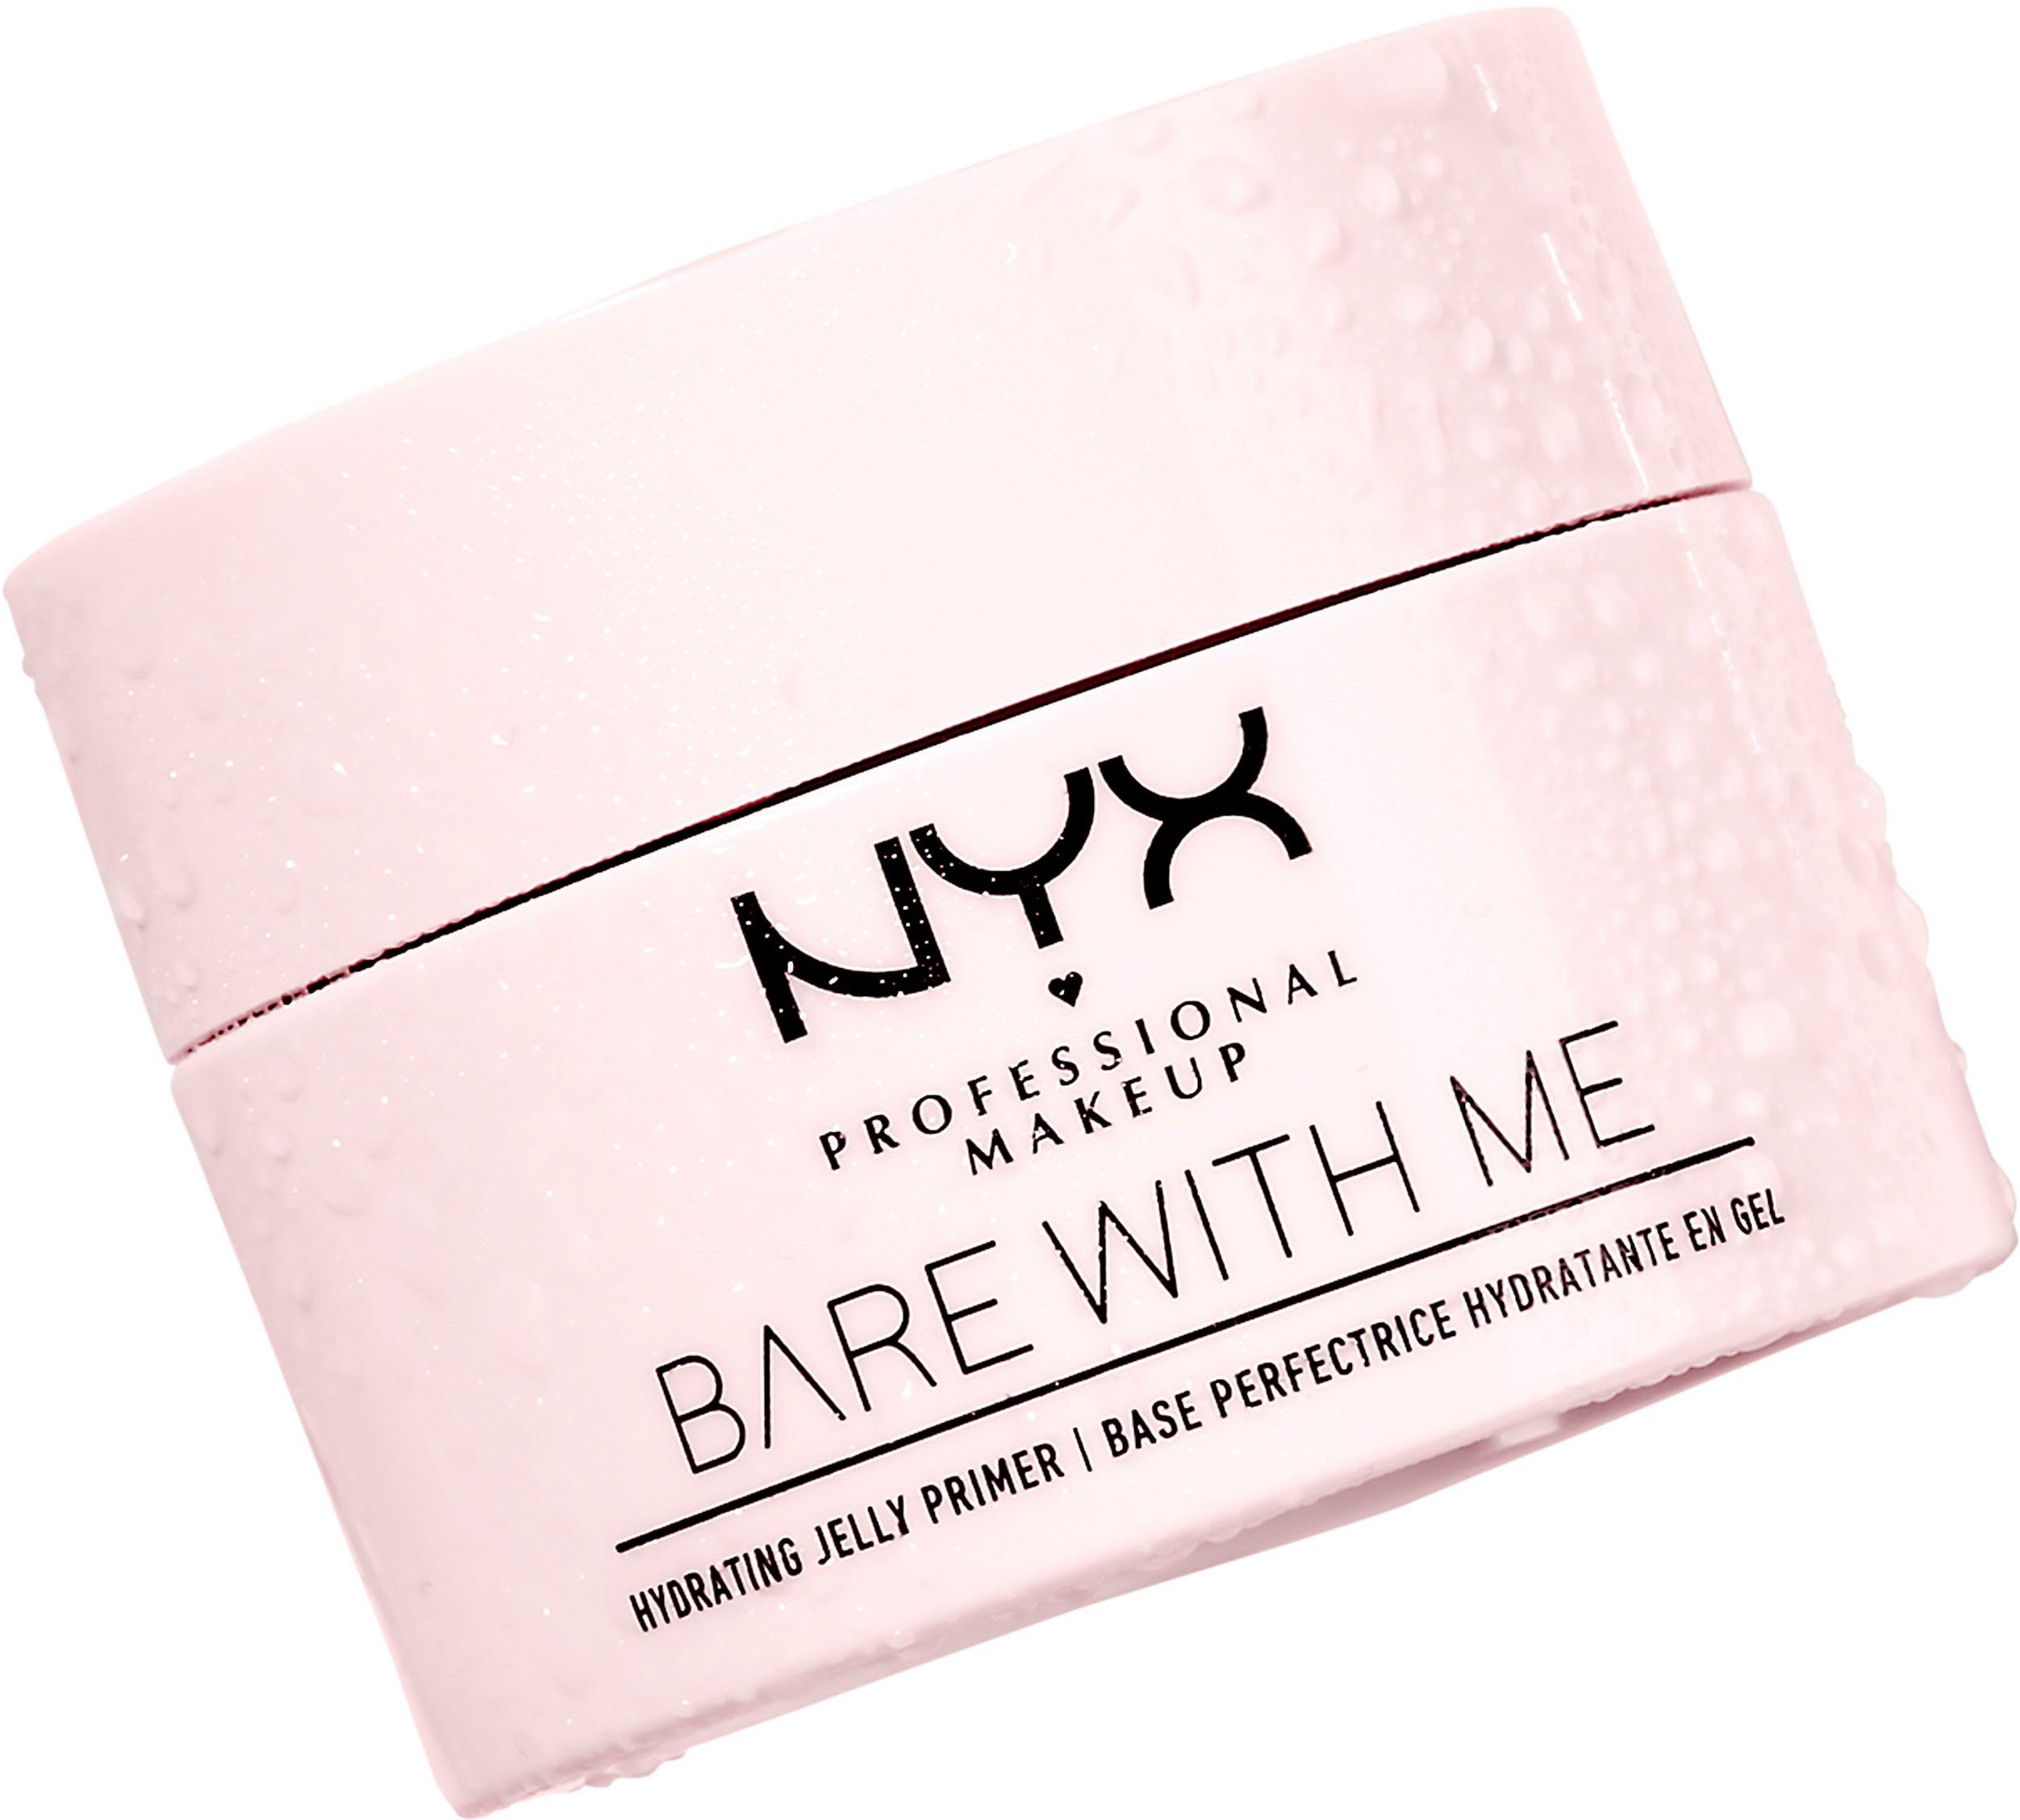 Professional NYX Me Makeup NYX Hydrating Primer Jelly Bare With Primer